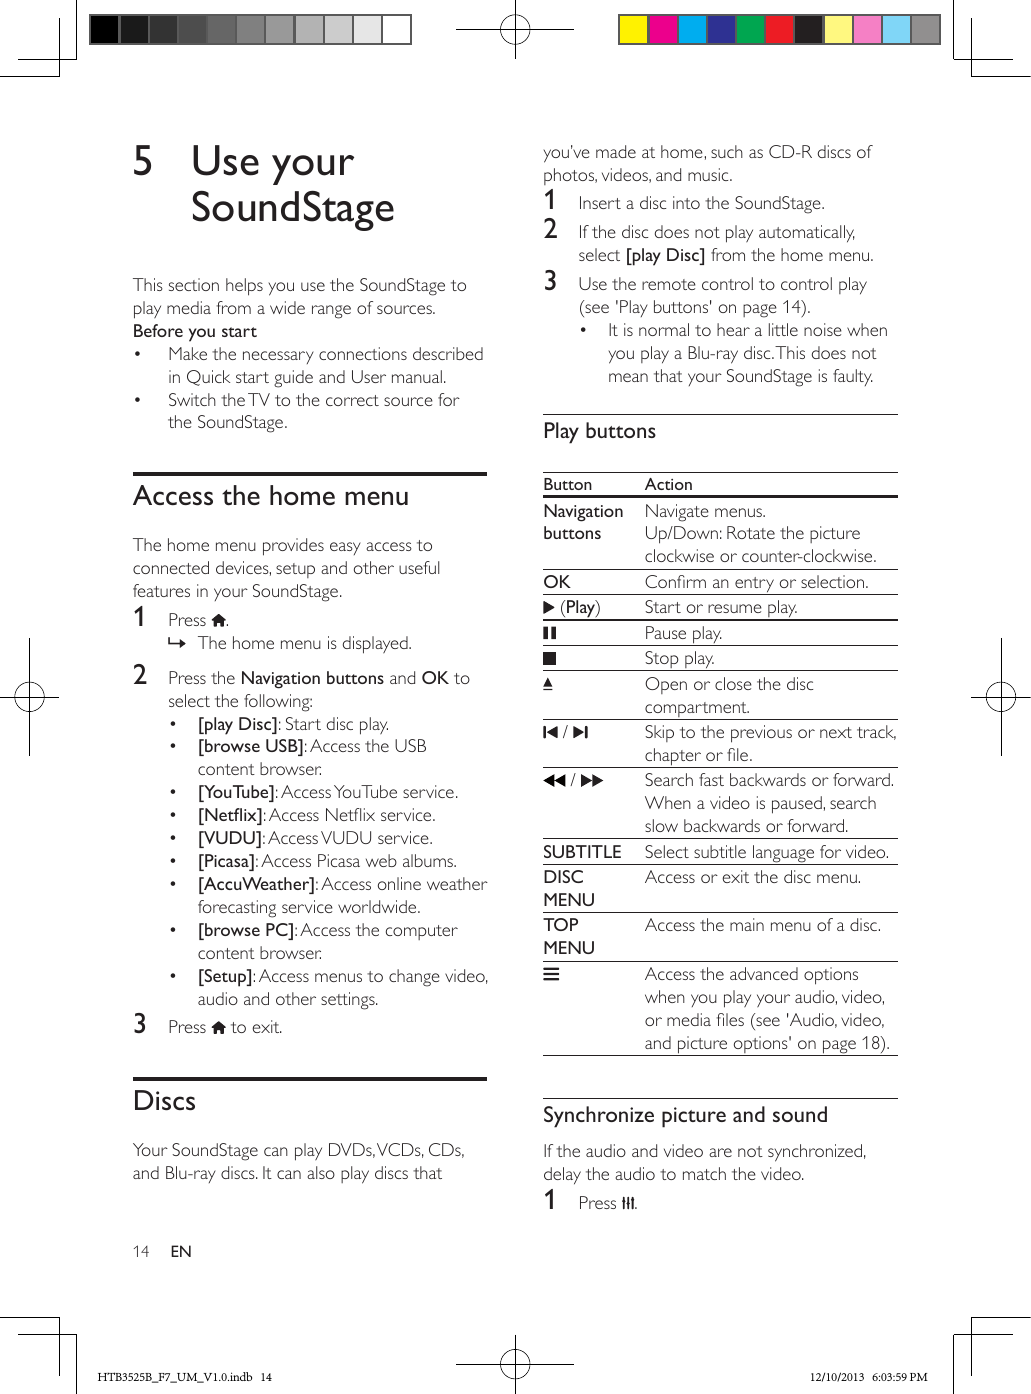 14 EN5  Use your SoundStageThis section helps you use the SoundStage to play media from a wide range of sources.Before you start•  Make the necessary connections described in Quick start guide and User manual.•  Switch the TV to the correct source for the SoundStage.Access the home menuThe home menu provides easy access to connected devices, setup and other useful features in your SoundStage.1  Press  . » The home menu is displayed.2  Press the Navigation buttons and OK to select the following:•  [play Disc]: Start disc play.•  [browse USB]: Access the USB content browser.•  [YouTube]: Access YouTube service.•  [Netix]: Access Netix service.•  [VUDU]: Access VUDU service.•  [Picasa]: Access Picasa web albums.•  [AccuWeather]: Access online weather forecasting service worldwide.•  [browse PC]: Access the computer content browser.•  [Setup]: Access menus to change video, audio and other settings.3  Press   to exit.DiscsYour SoundStage can play DVDs, VCDs, CDs, and Blu-ray discs. It can also play discs that you’ve made at home, such as CD-R discs of photos, videos, and music.1  Insert a disc into the SoundStage.2  If the disc does not play automatically, select [play Disc] from the home menu.3  Use the remote control to control play (see &apos;Play buttons&apos; on page 14).•  It is normal to hear a little noise when you play a Blu-ray disc. This does not mean that your SoundStage is faulty.Play buttonsButton ActionNavigation buttonsNavigate menus. Up/Down: Rotate the picture clockwise or counter-clockwise.OK Conrm an entry or selection. (Play) Start or resume play.   Pause play.Stop play. Open or close the disc compartment. /  Skip to the previous or next track, chapter or le. /     Search fast backwards or forward.When a video is paused, search slow backwards or forward.SUBTITLE Select subtitle language for video.DISC MENUAccess or exit the disc menu.TOP MENUAccess the main menu of a disc.Access the advanced options when you play your audio, video, or media les (see &apos;Audio, video, and picture options&apos; on page 18).  Synchronize picture and soundIf the audio and video are not synchronized, delay the audio to match the video.1  Press  .HTB3525B_F7_UM_V1.0.indb   14 12/10/2013   6:03:59 PM